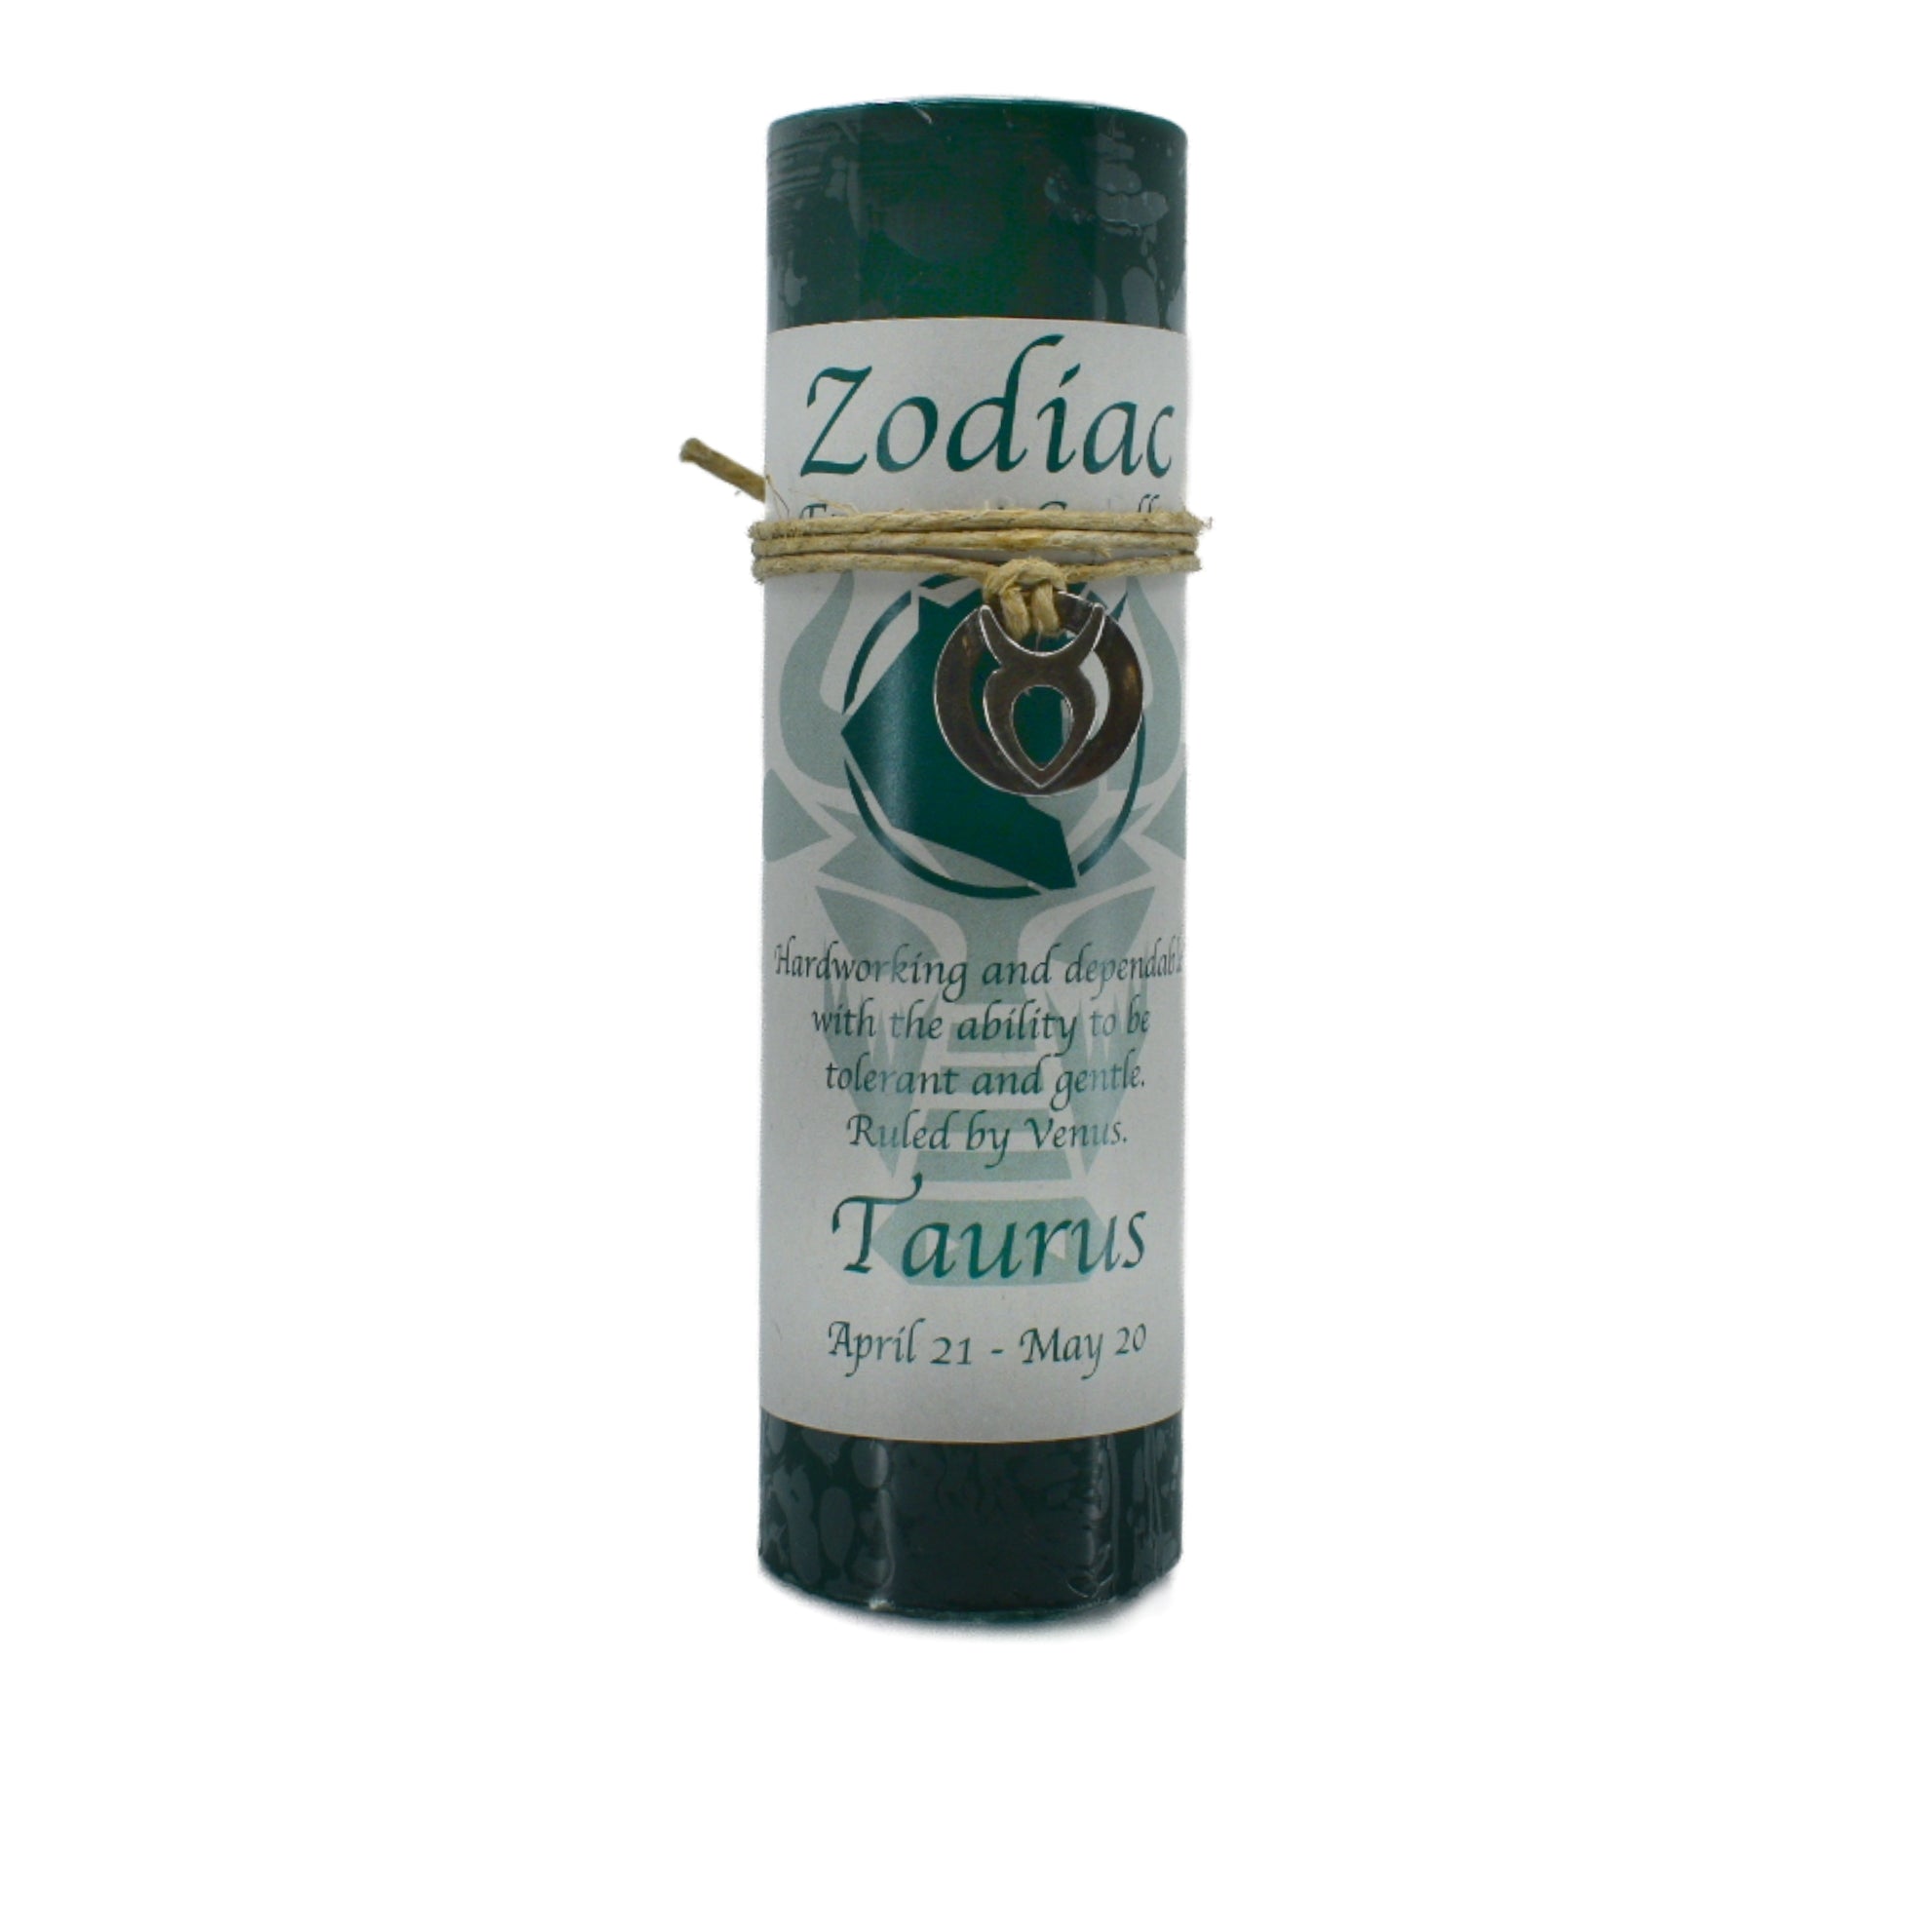 Taurus Zodiac Pendant Candle.  Green candle with a pewter pendant attached that can be worn as a necklace or used as an amulet.  Taurus is April 21 to May 20 and is ruled by the Venus.  Hardworking and dependable with the ability to be gentle and tolerant.